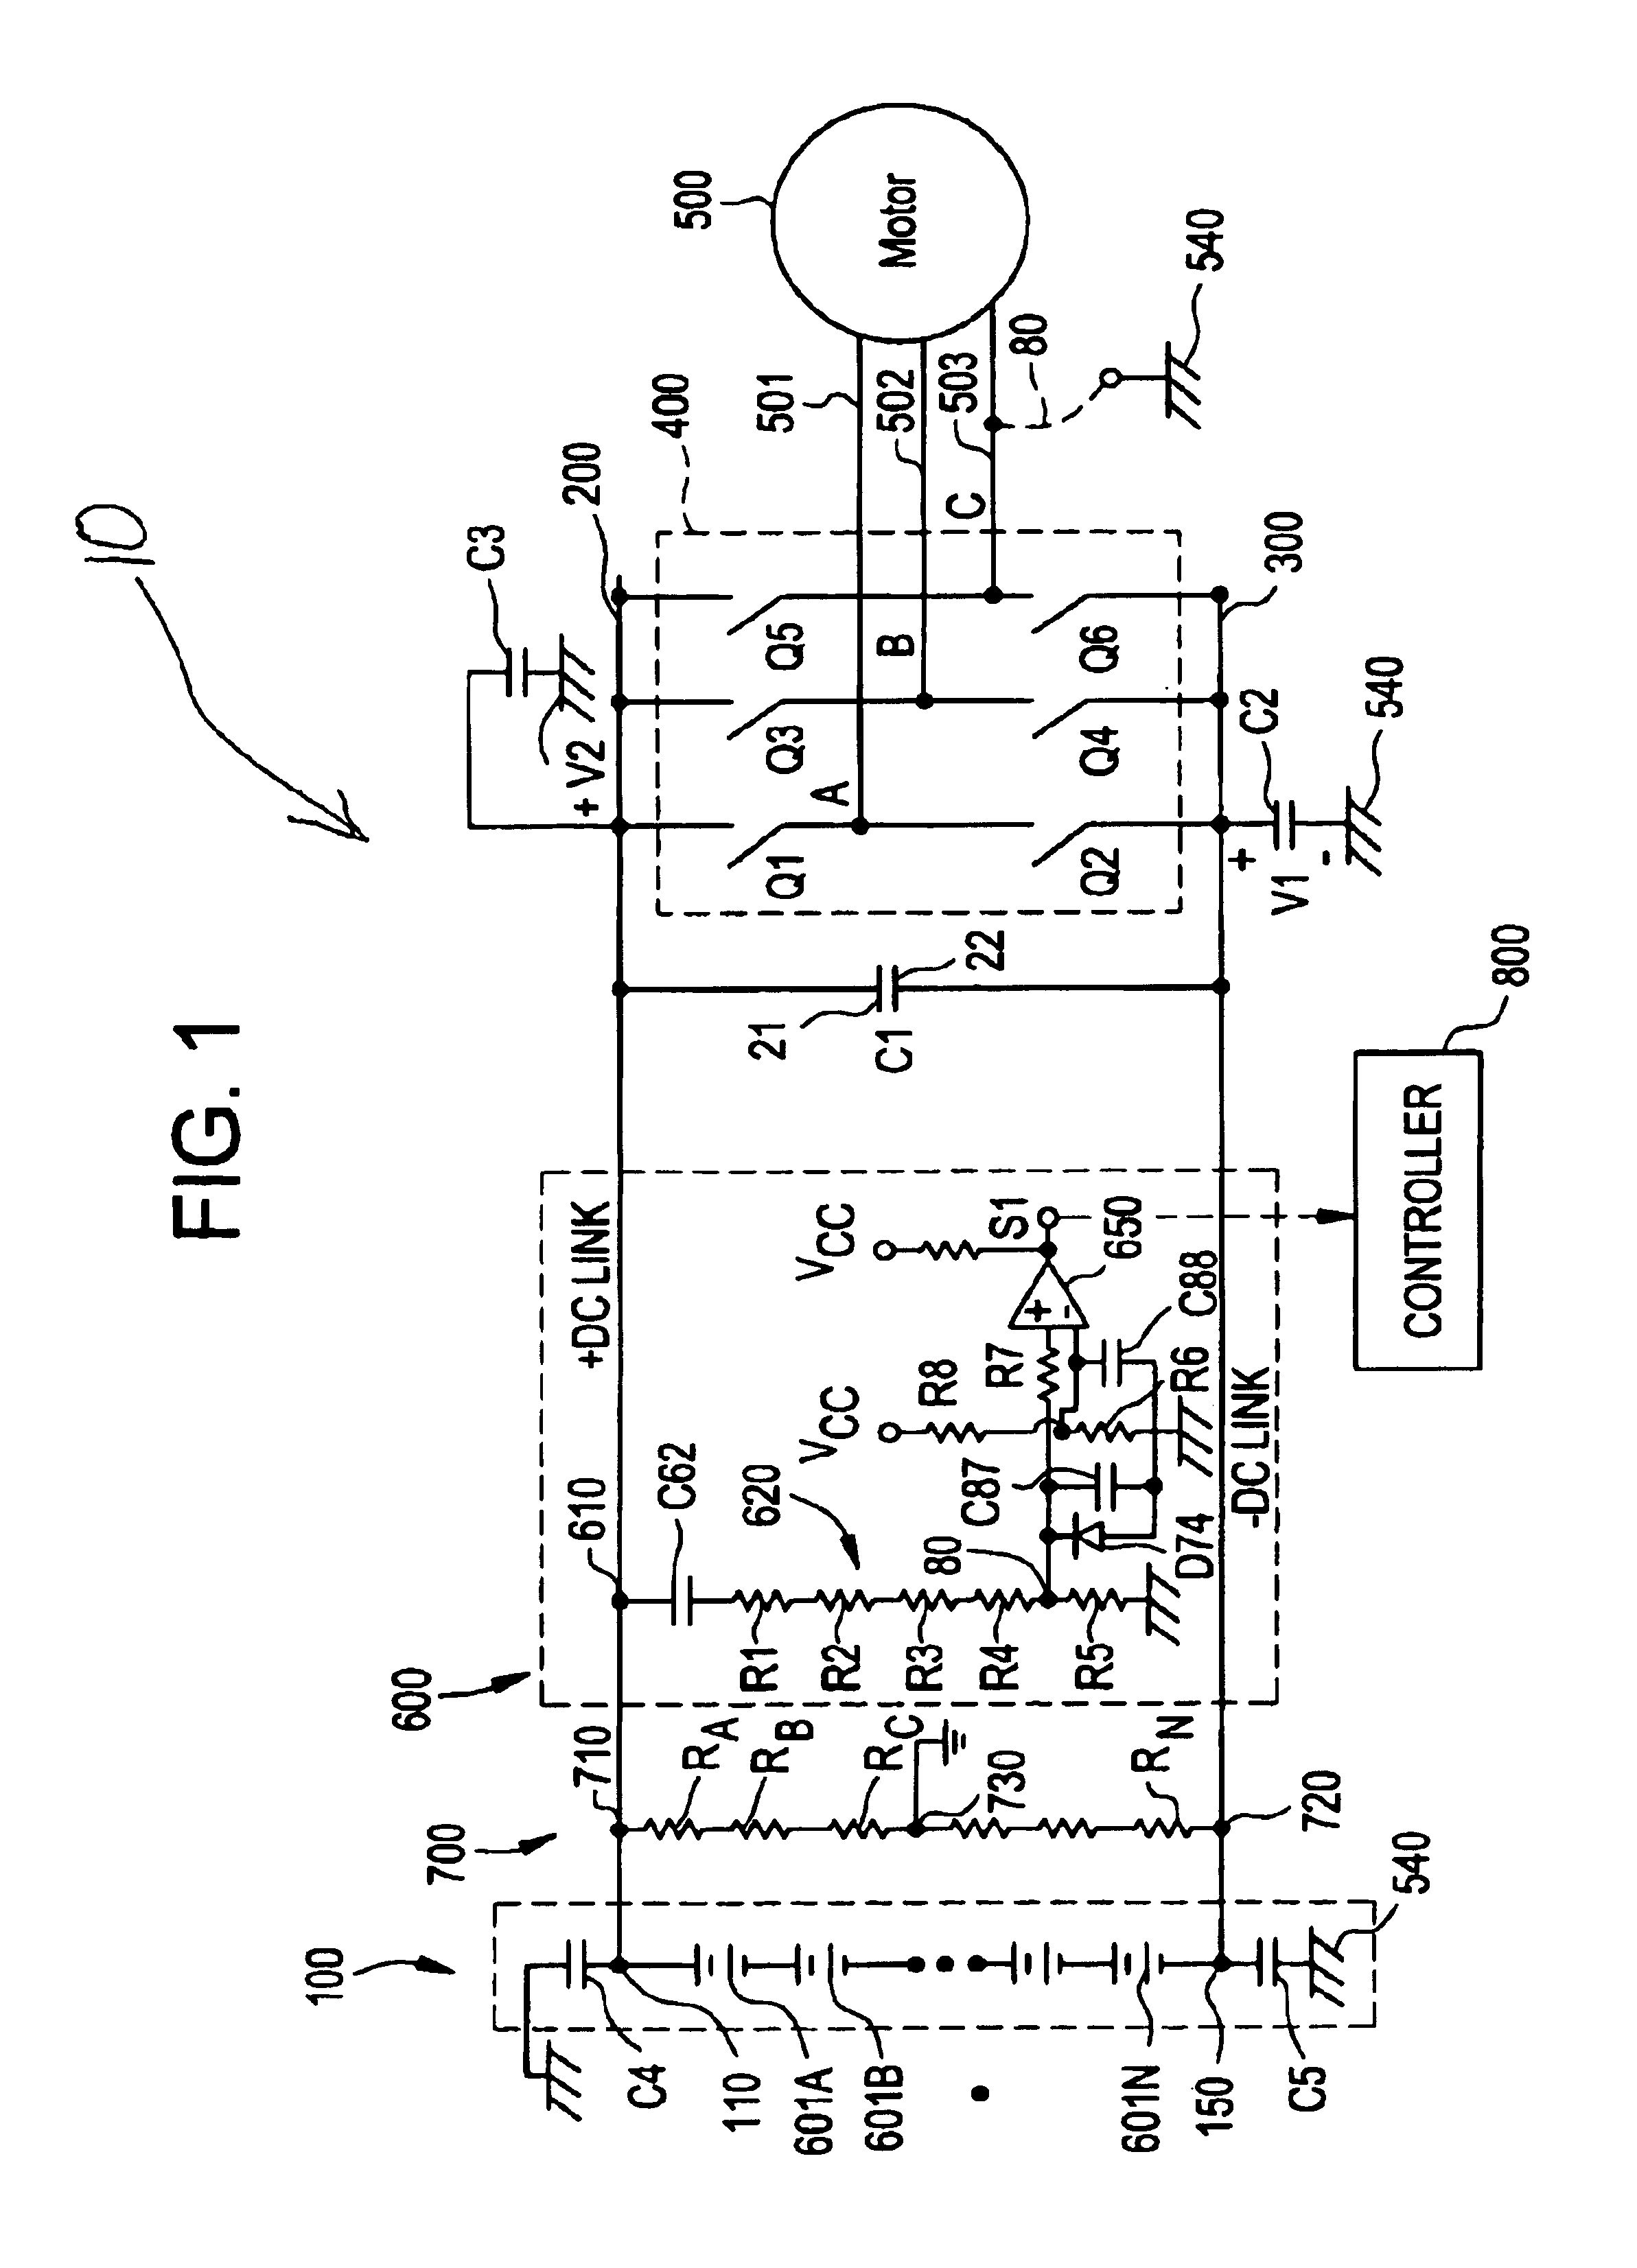 Ground fault detection system and method